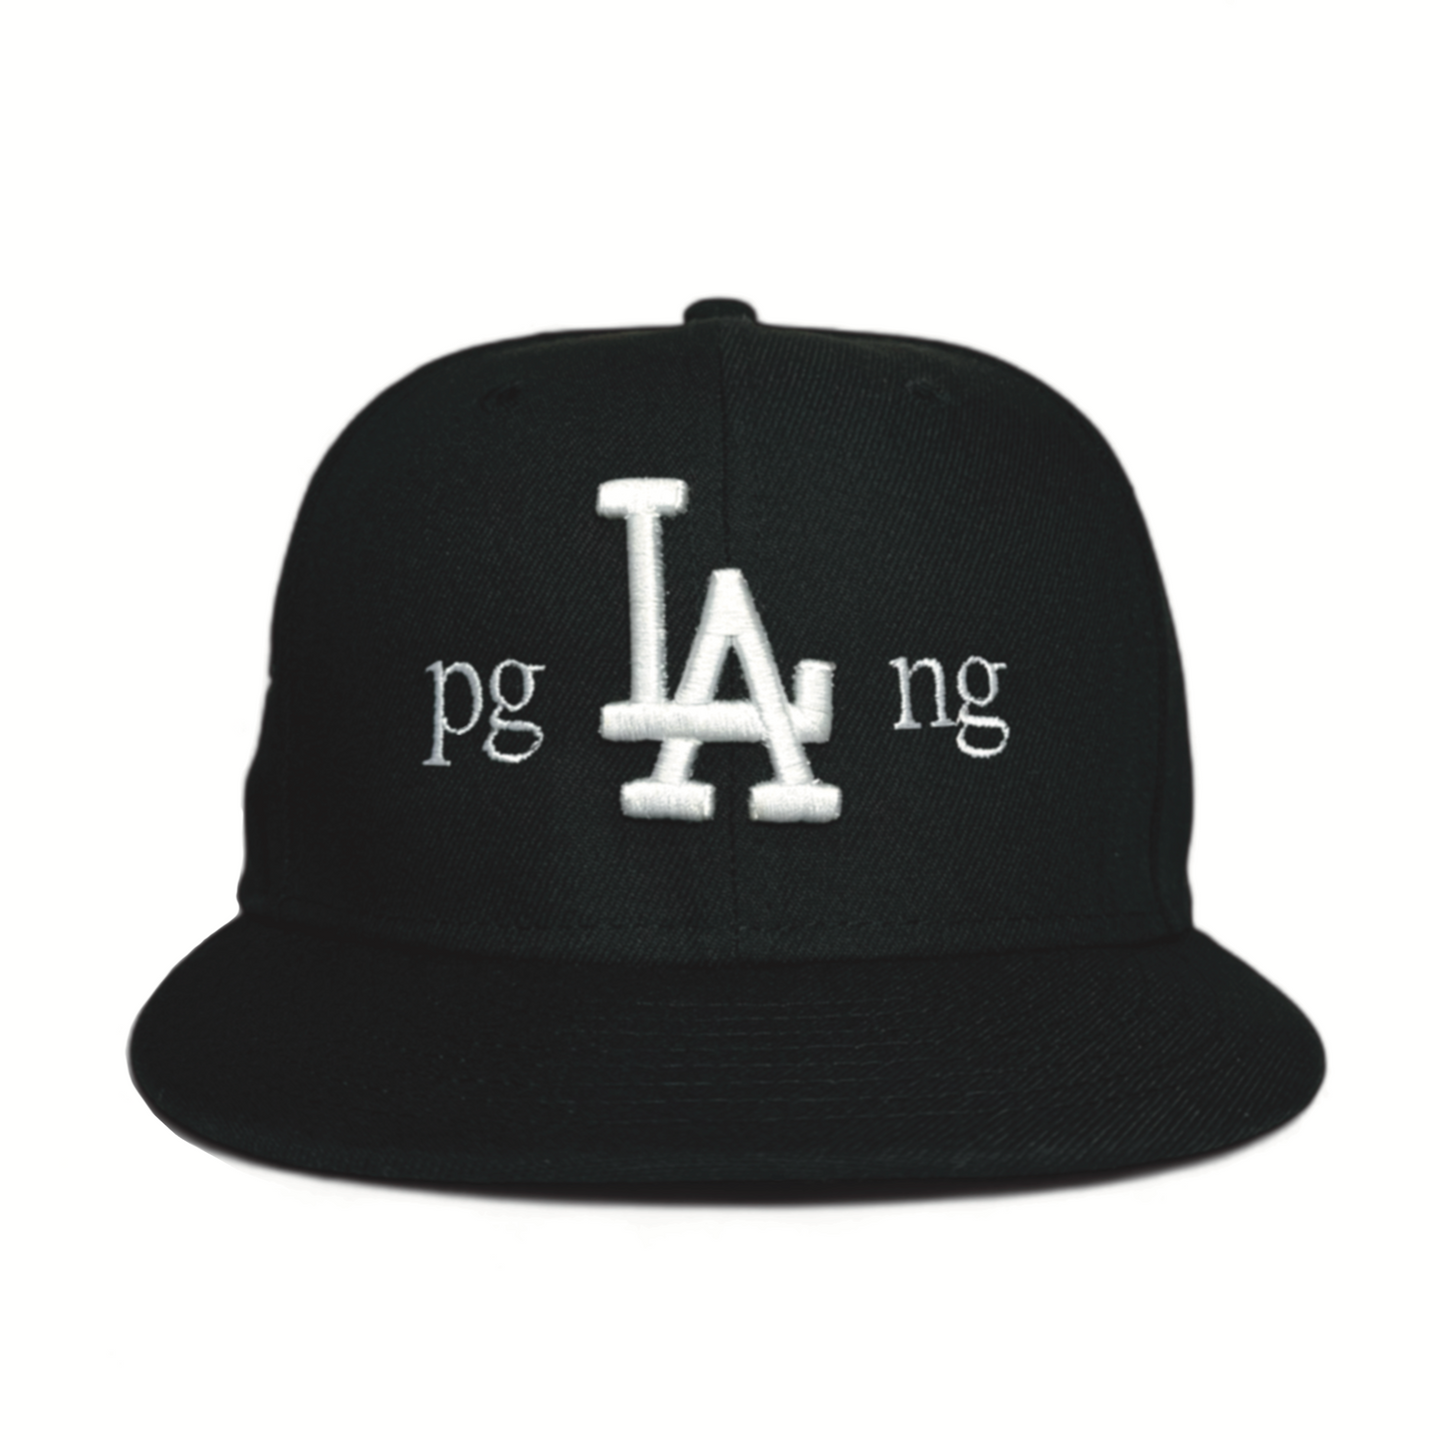 PG/NG FITTED CAP